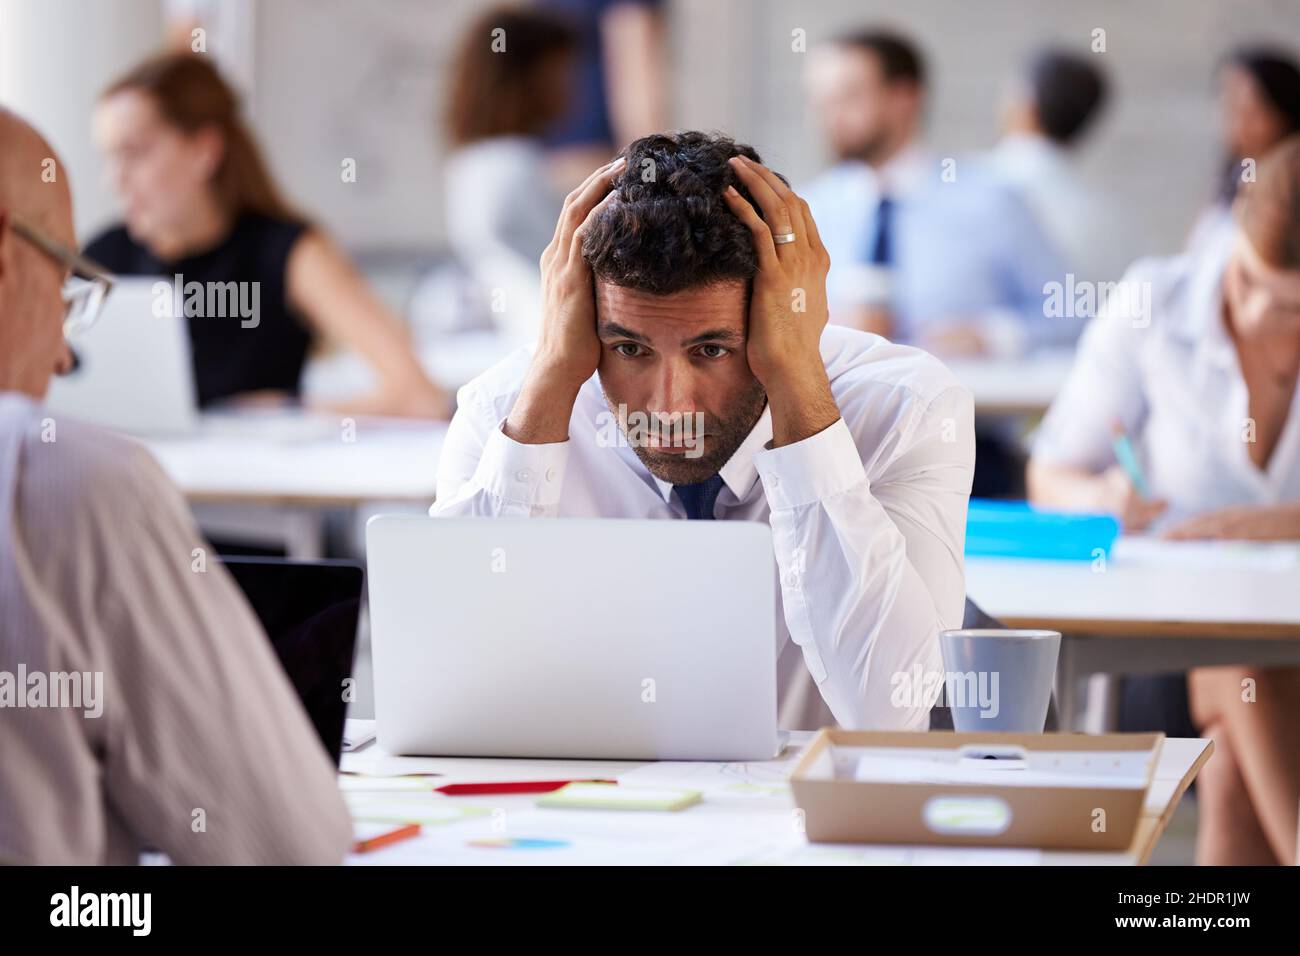 doubts & worry, stress & struggle, pressure, doubts & worries, uncertainty & worry, stress, stress & struggles, stress and struggle, pressures Stock Photo